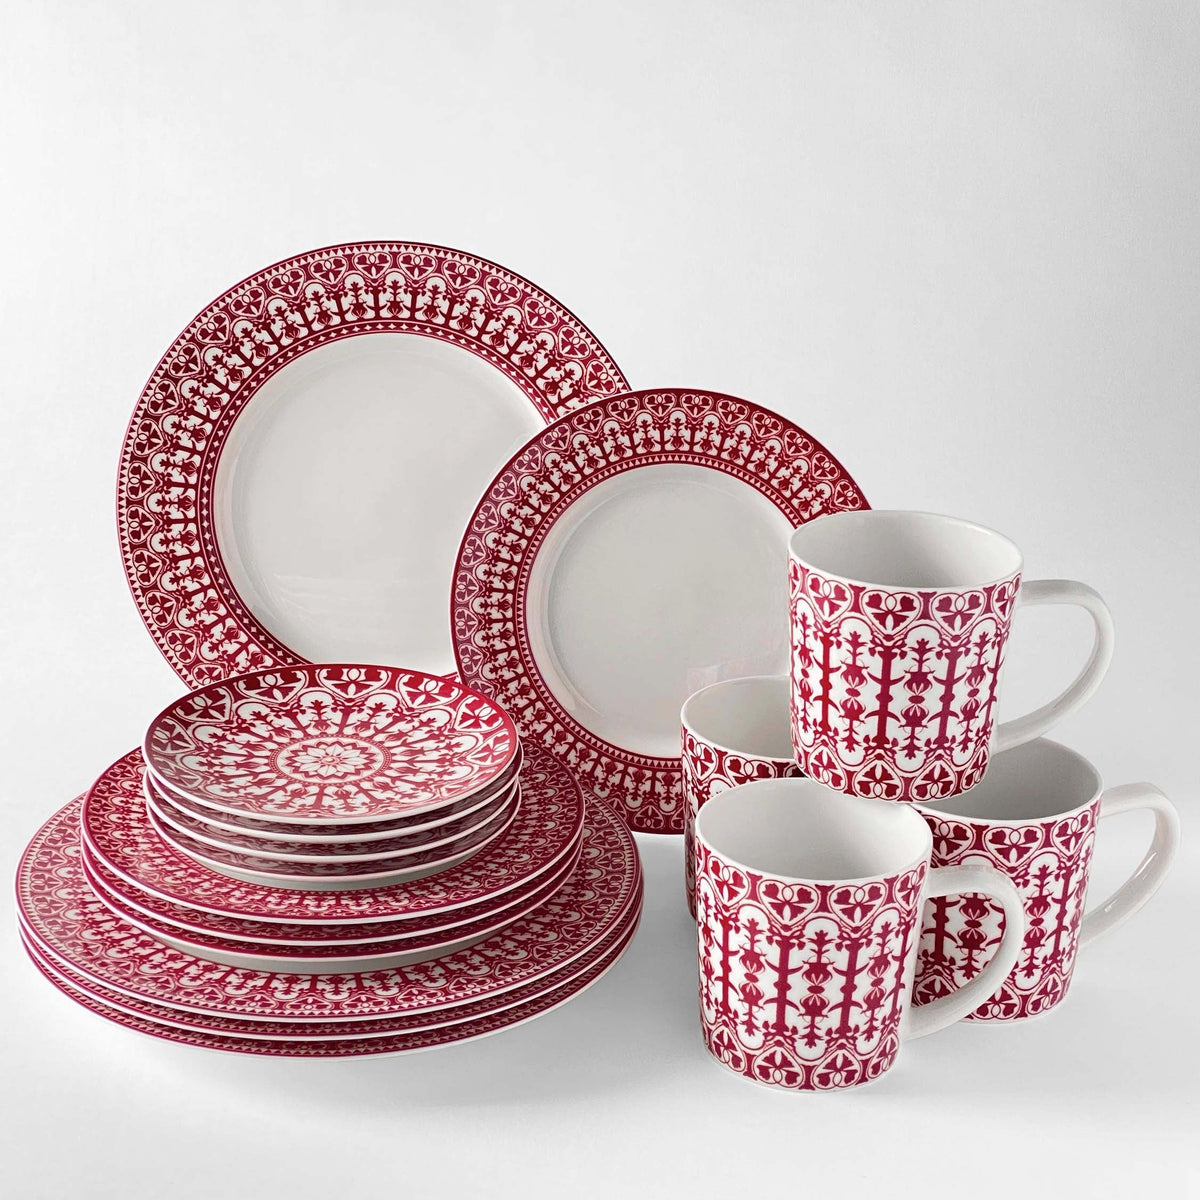 A set of Casablanca Crimson Rimmed Dinner Plates by Caskata Artisanal Home in a festive red and white color combination displayed on a sleek white surface.